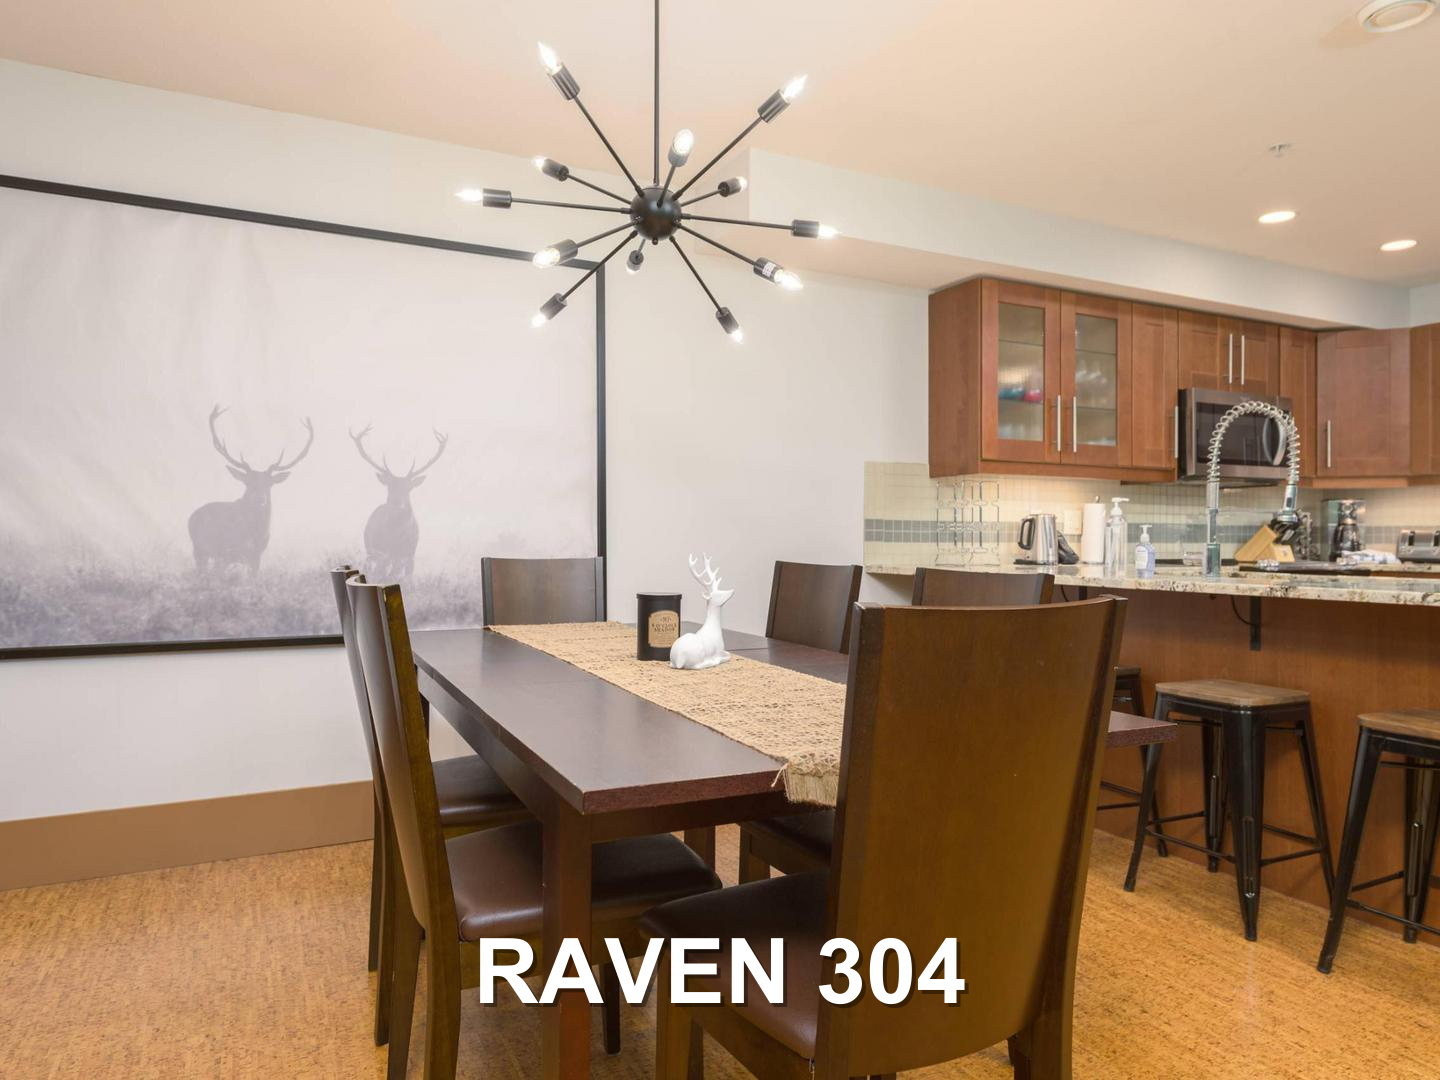 The Raven 304 dining room, with a dark wooden table and modern chandelier above, and the kitchen in the background, located at Big White Ski Resort and managed by Luxury Mountain Vacation Rentals.